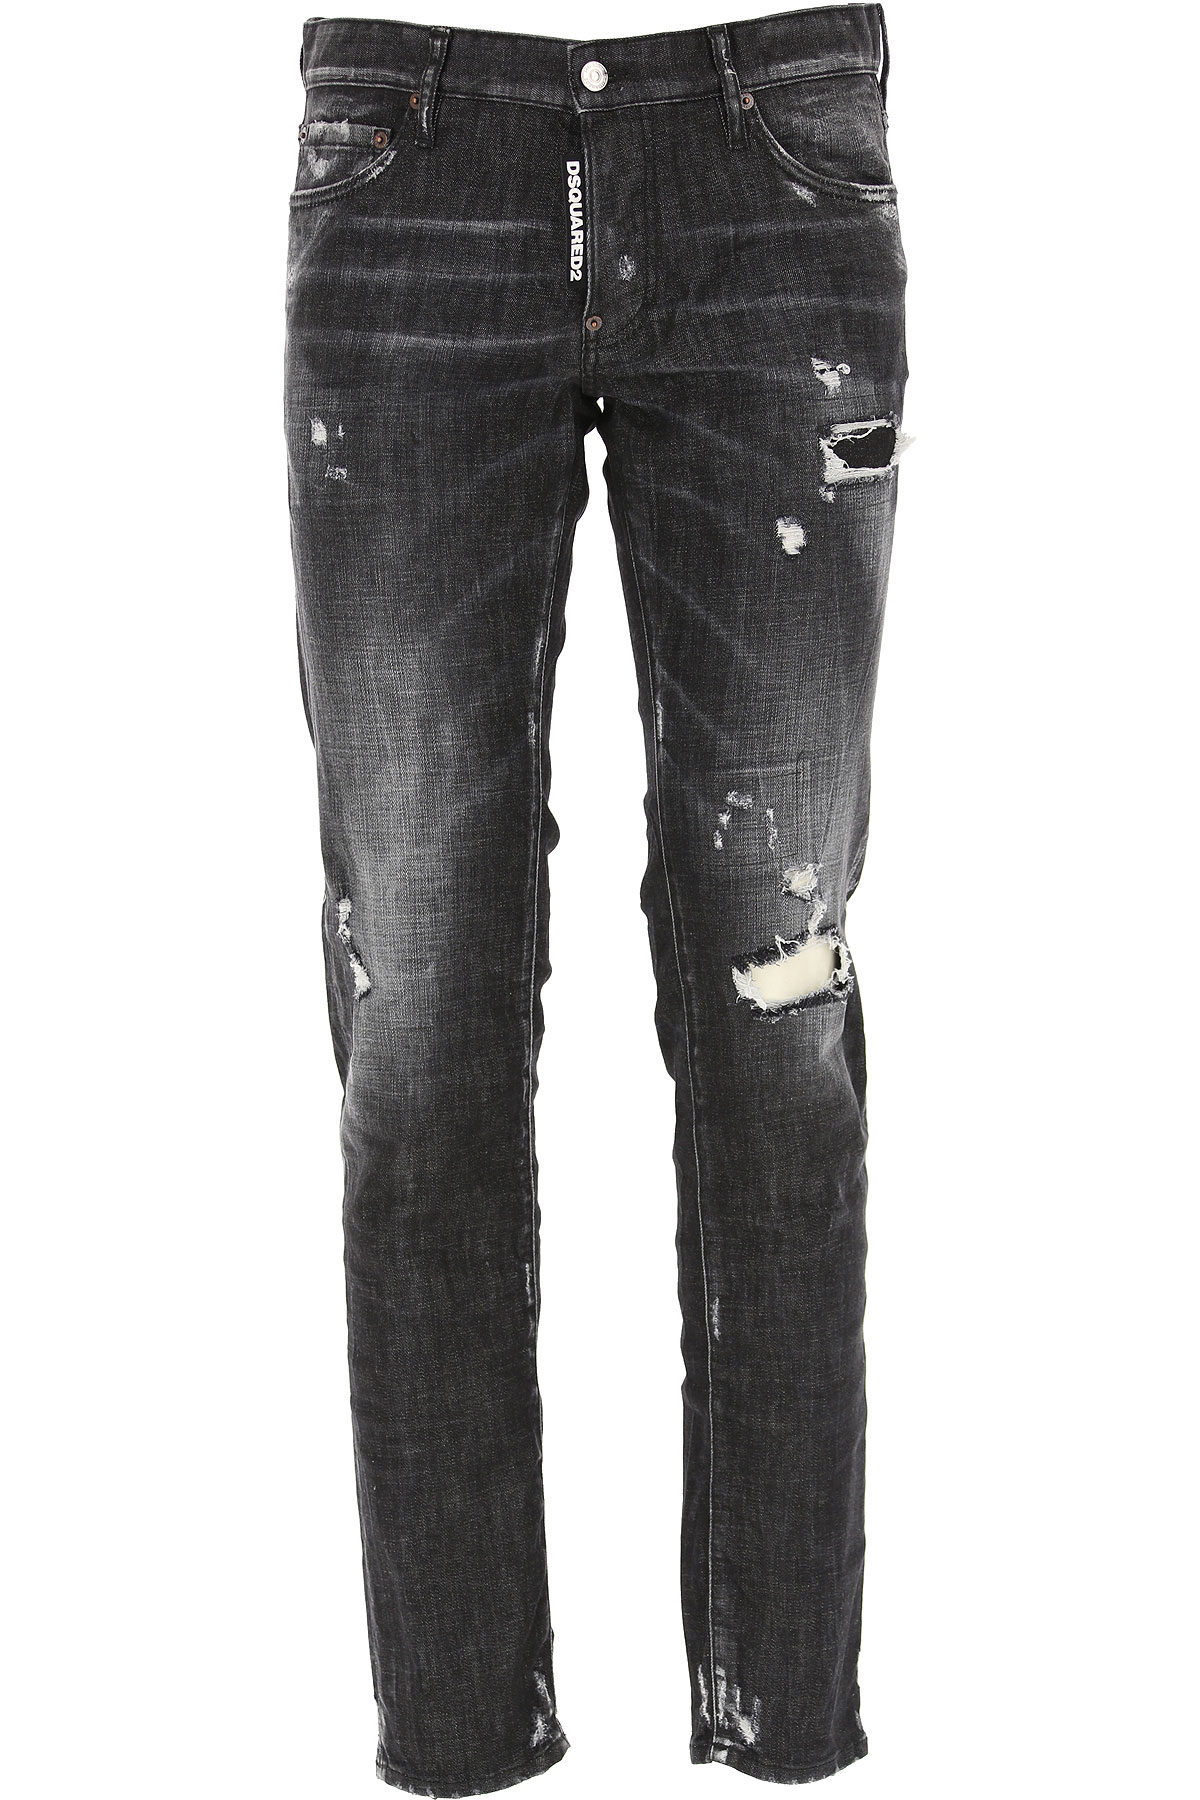 Mens Clothing Dsquared2, Style code: s74lb0587-s30357-900